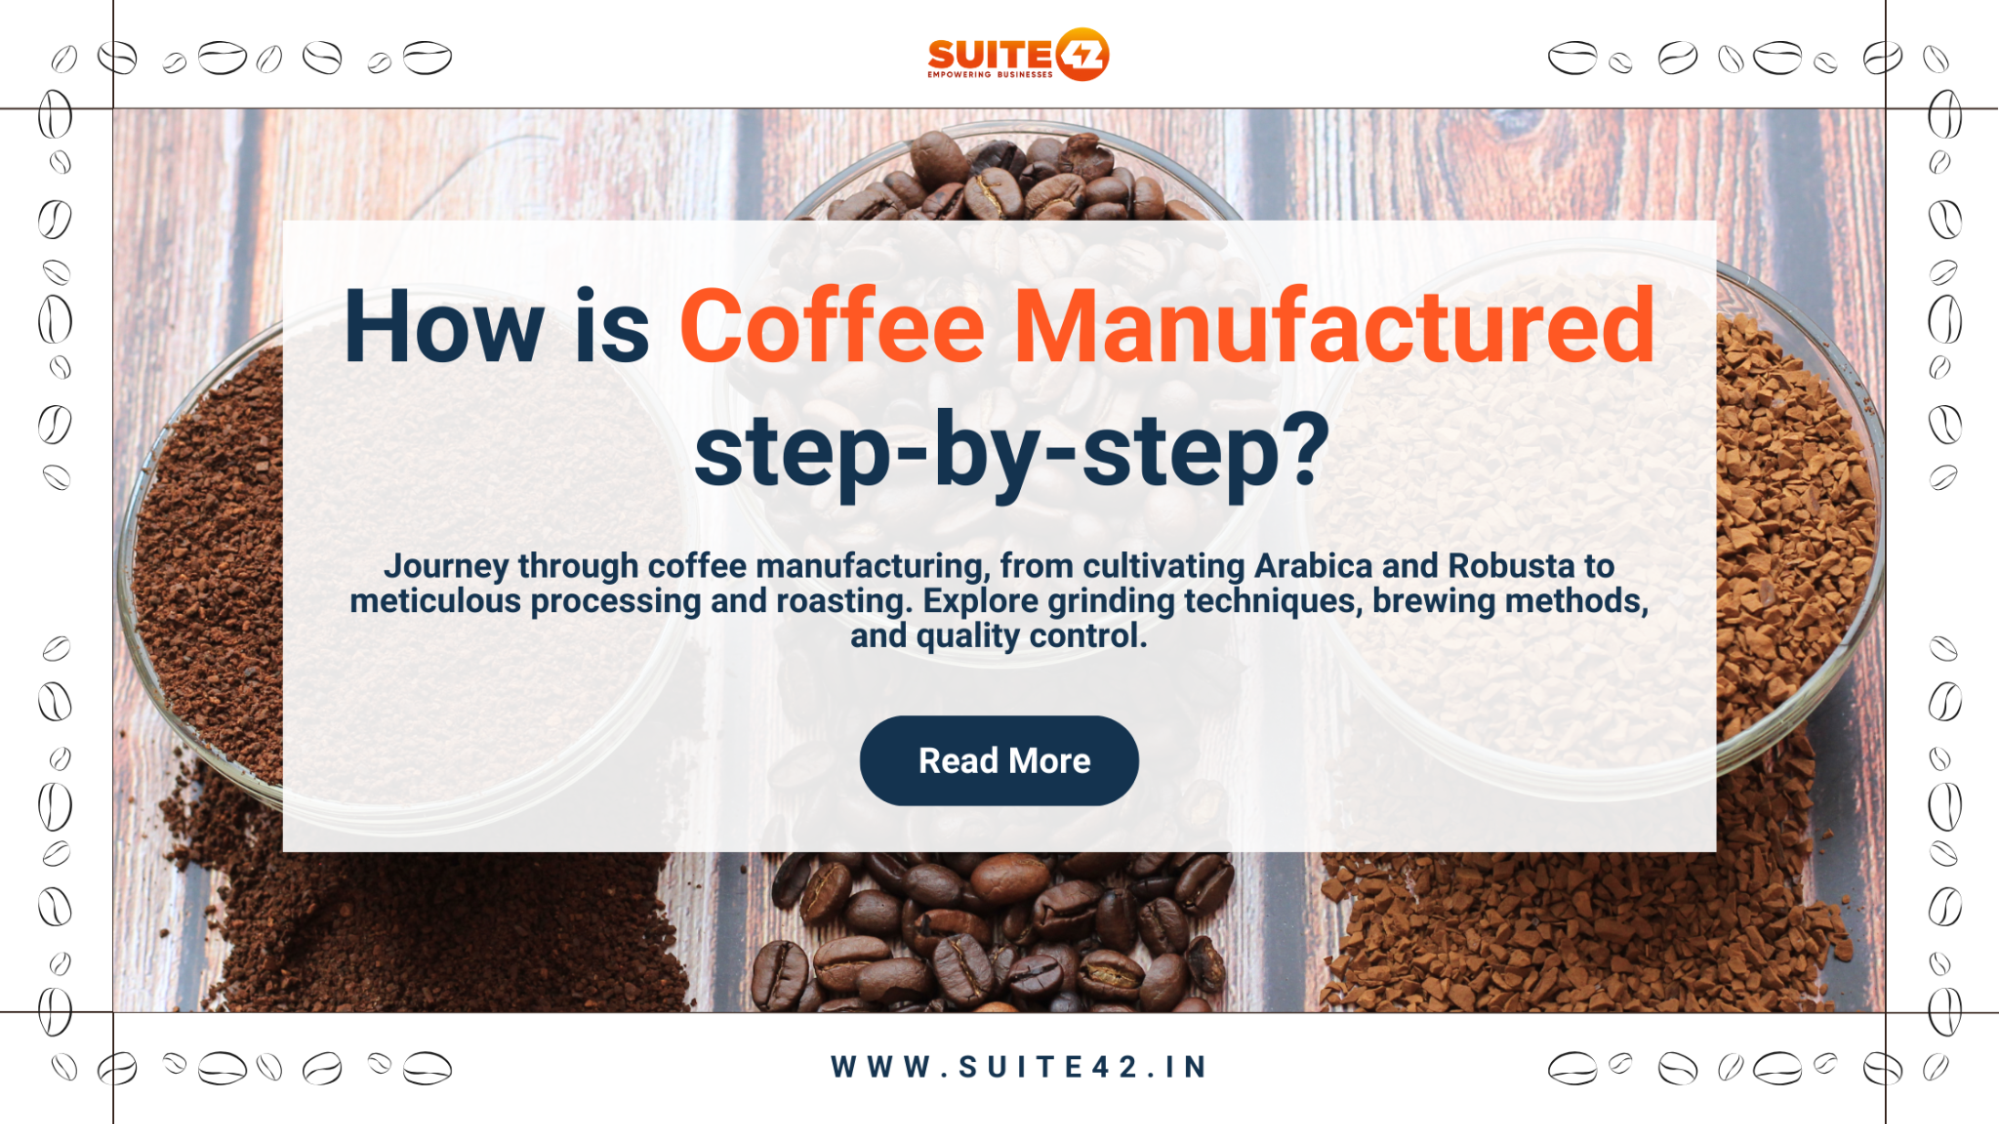 Step-wise coffee manufacturing process | Suite42